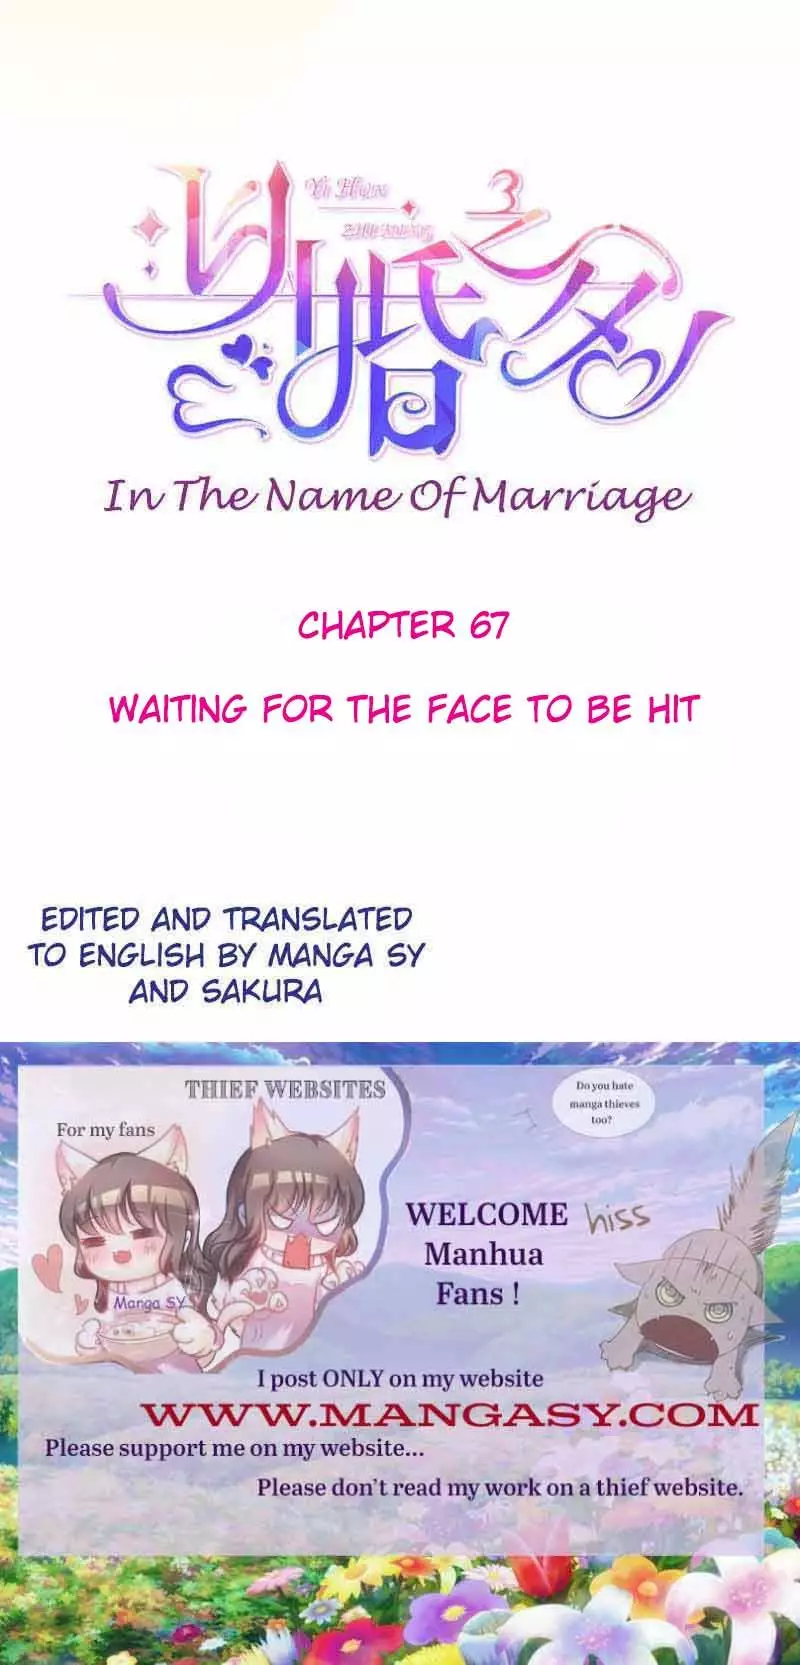 In The Name Of Marriage - 67 page 1-90ccbe51